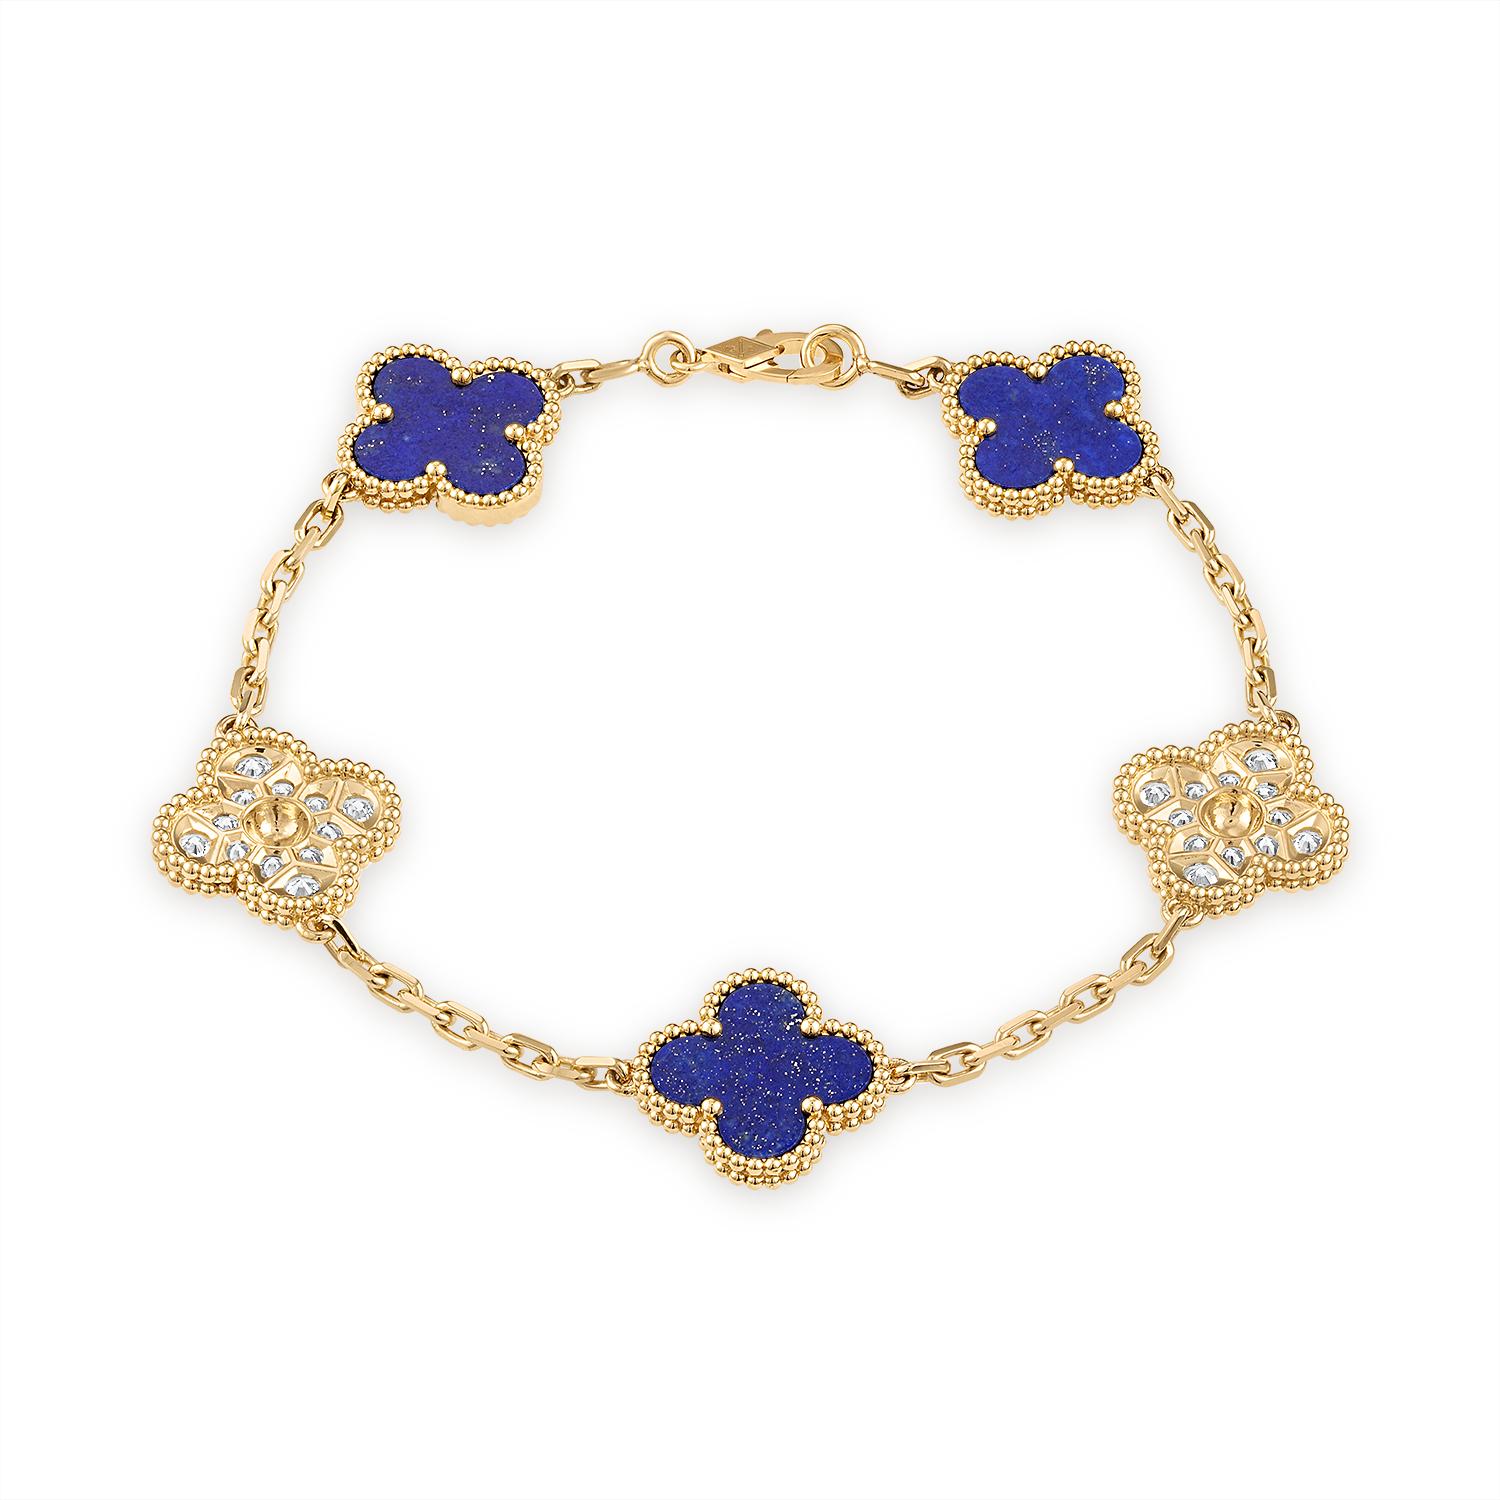 The Lapis Lazuli alternating diamonds Vintage Alhambra bracelet. Limited edition in Paris flagship store around 2018. A true collector's piece. Very well-kept excellent condition. Comes with the boxes and the certificate. The original length has